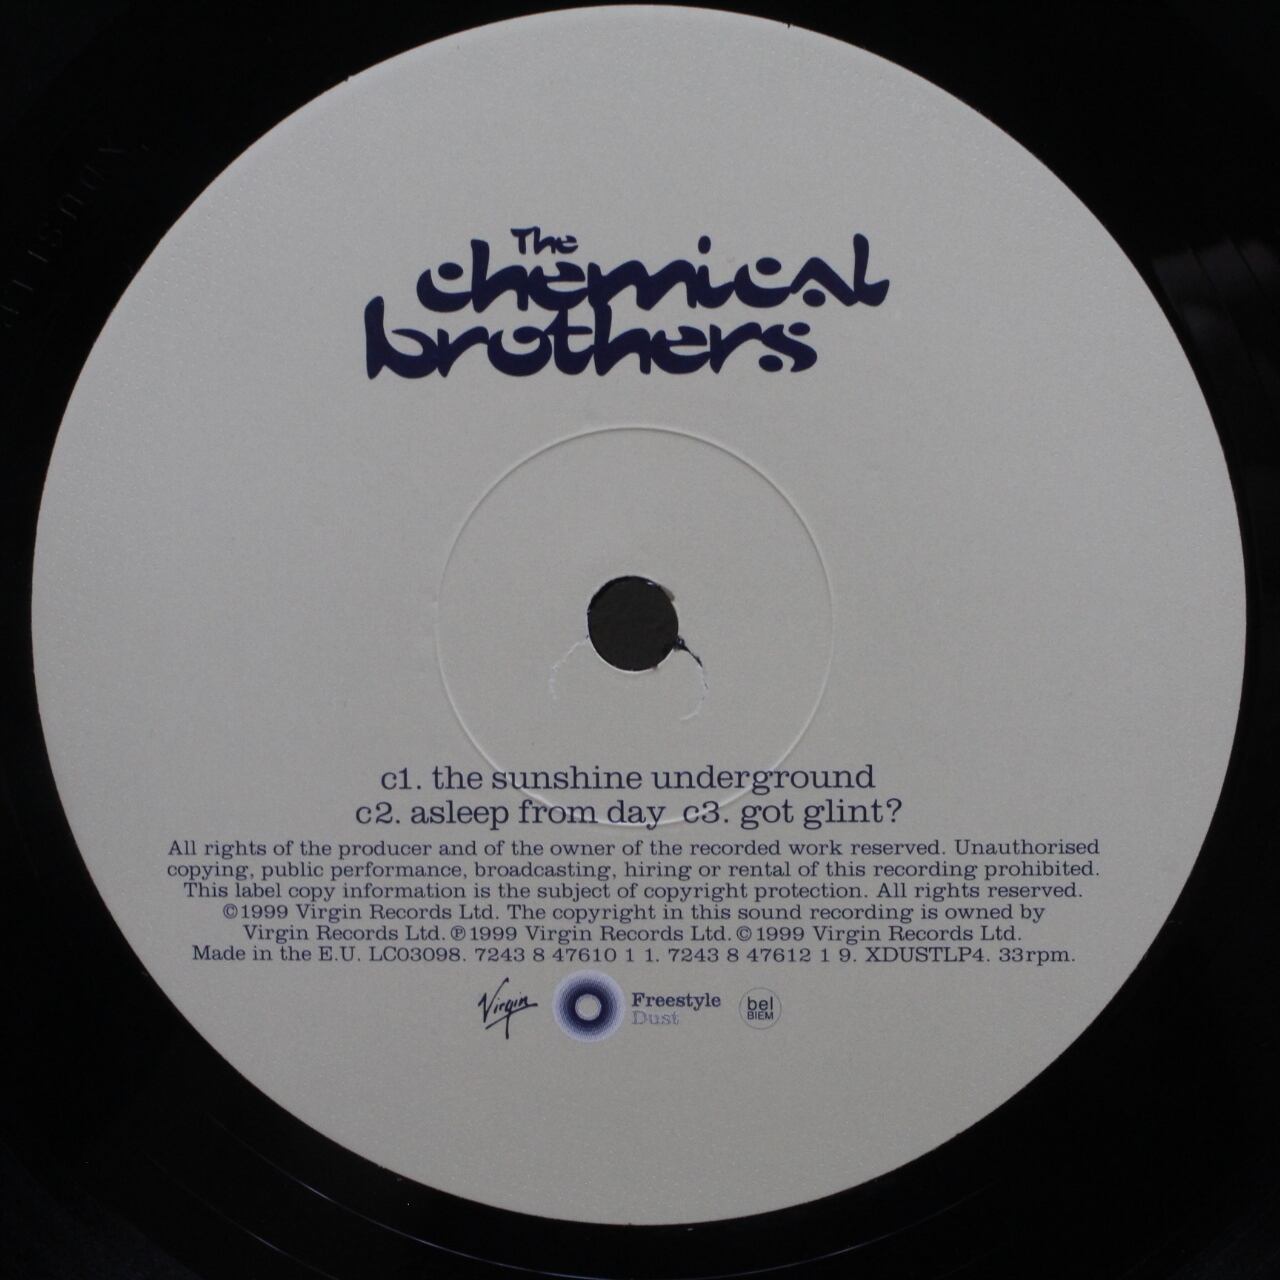 The Chemical Brothers / Surrender [XDUSTLP4, 7243 8 47610 1 1] - 画像5